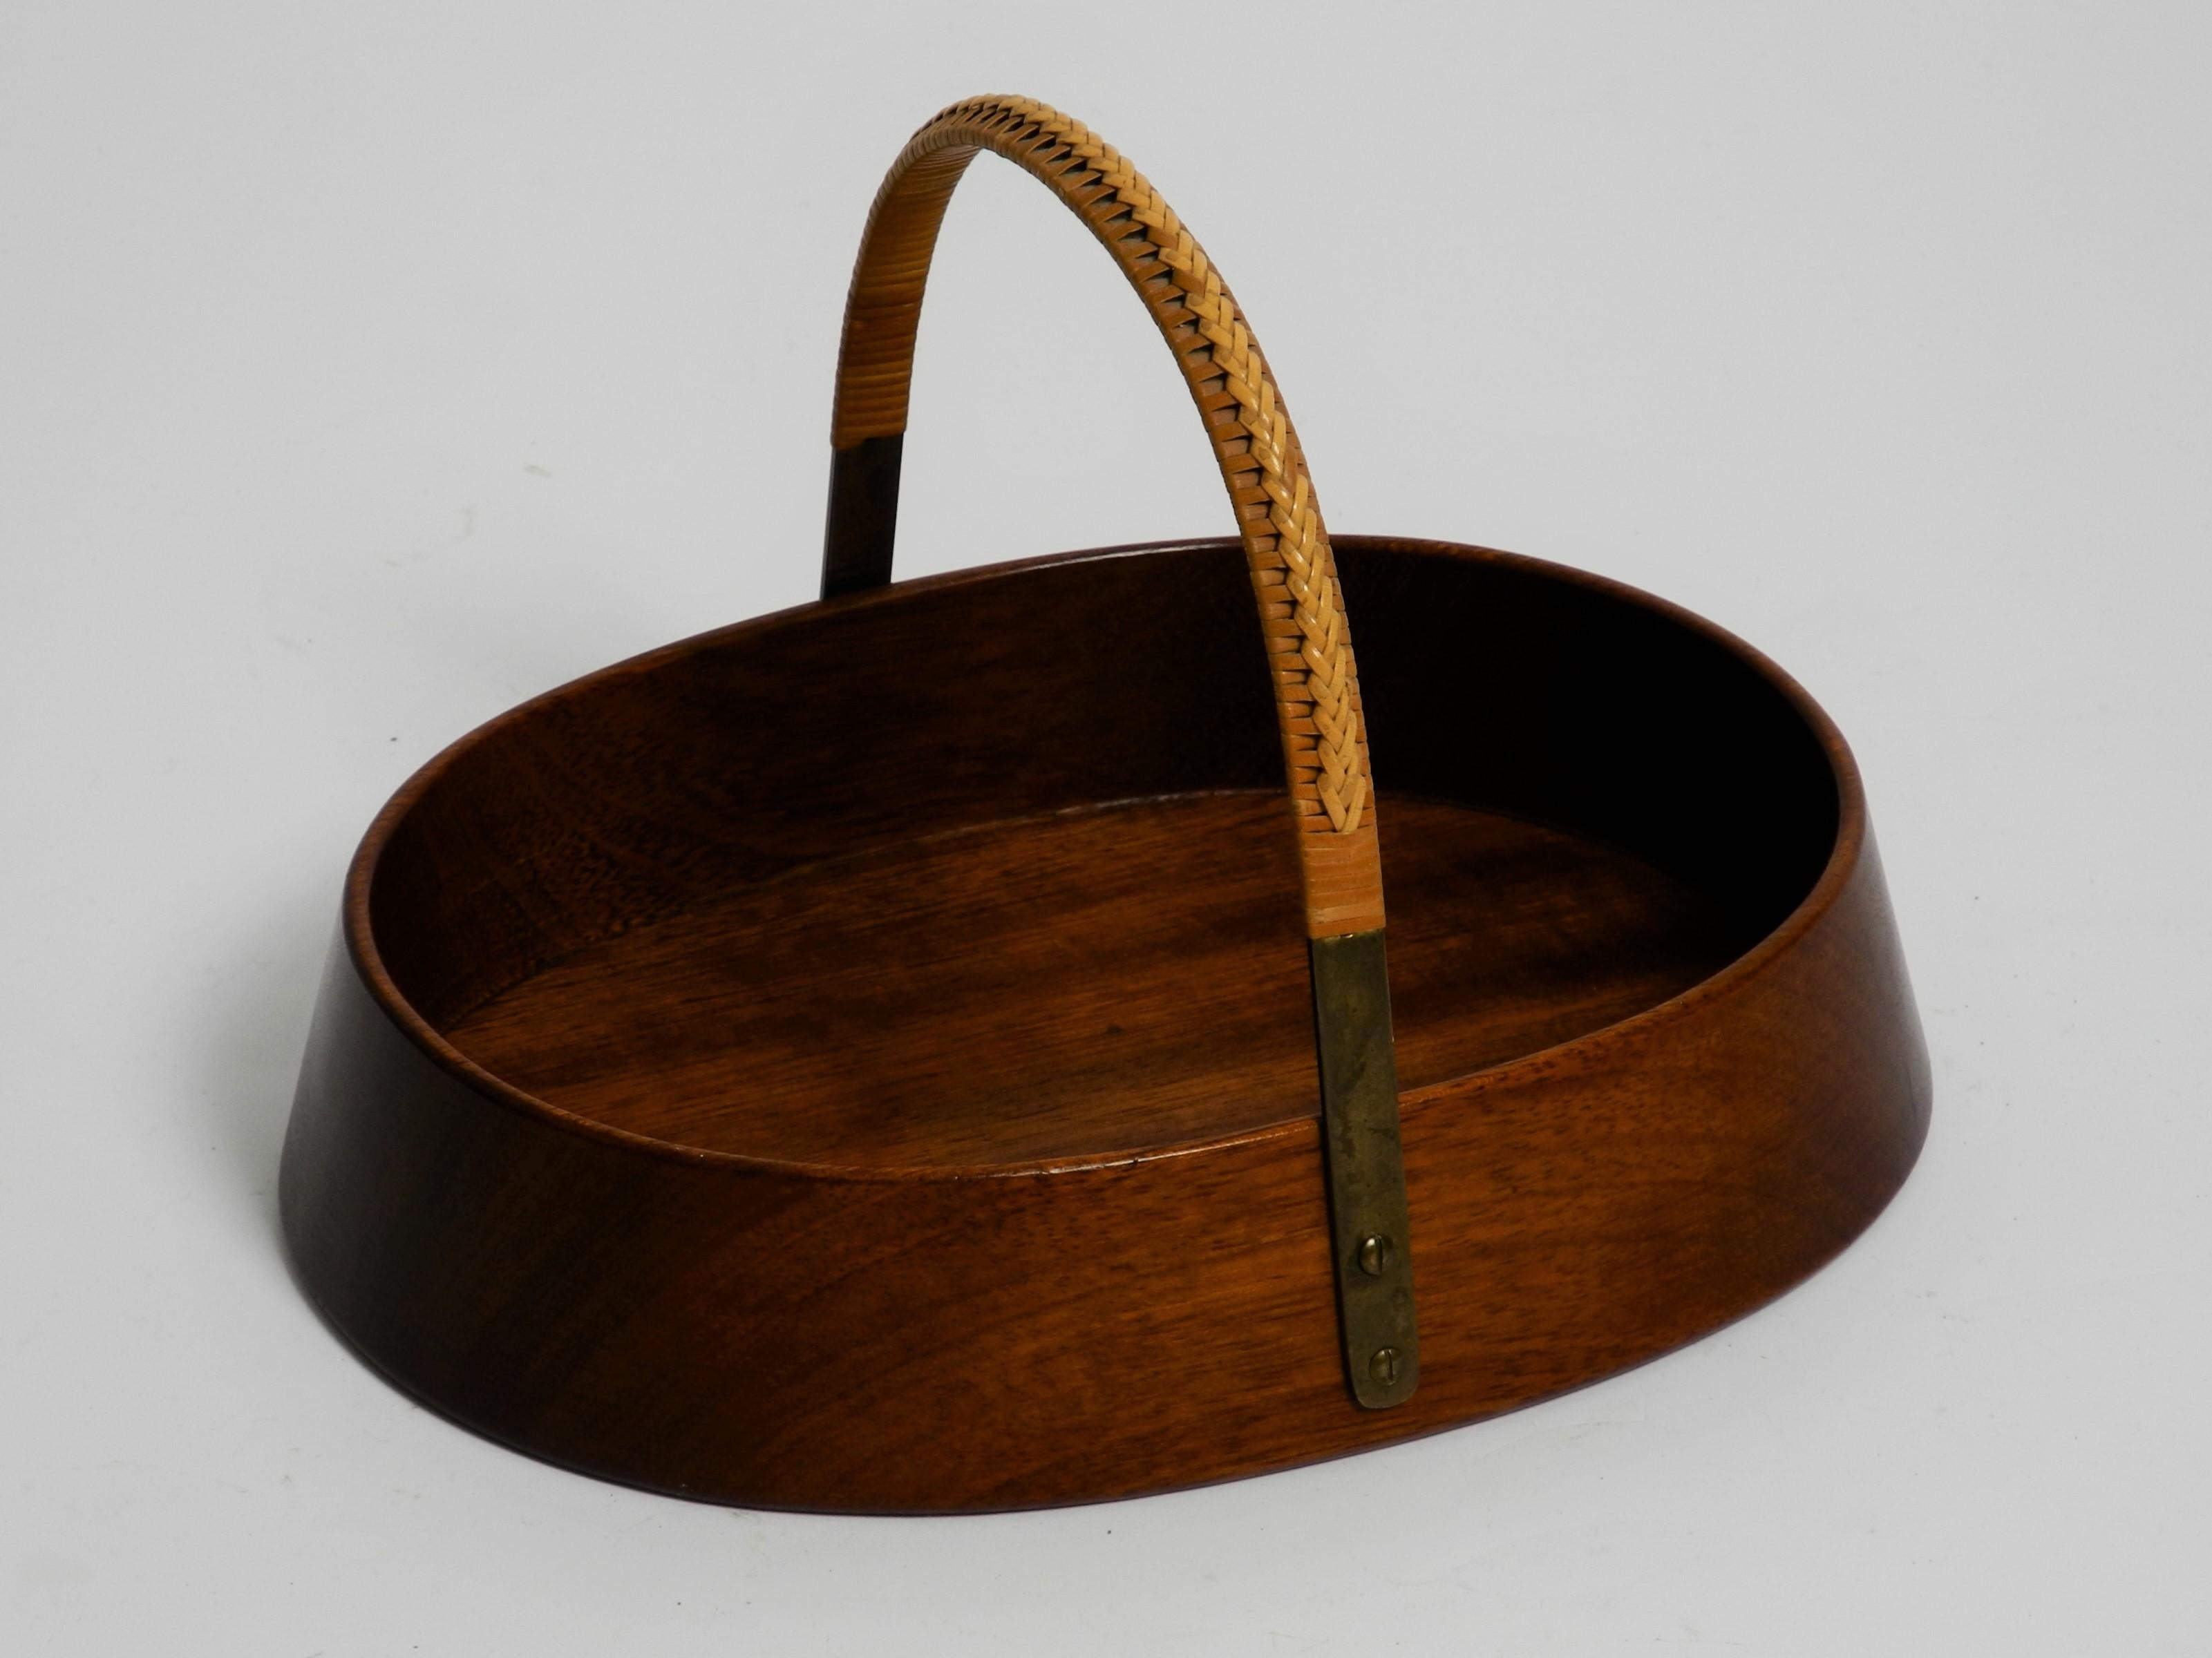 Original 1950s bowl element made by of solid teak wood and brass loop with rattan at the top for carrying. This fantastic piece was designed by Carl Auböck in the 1950s, and handcrafted in his Workshop in Vienna, Autria in the 1950s. 

It is a